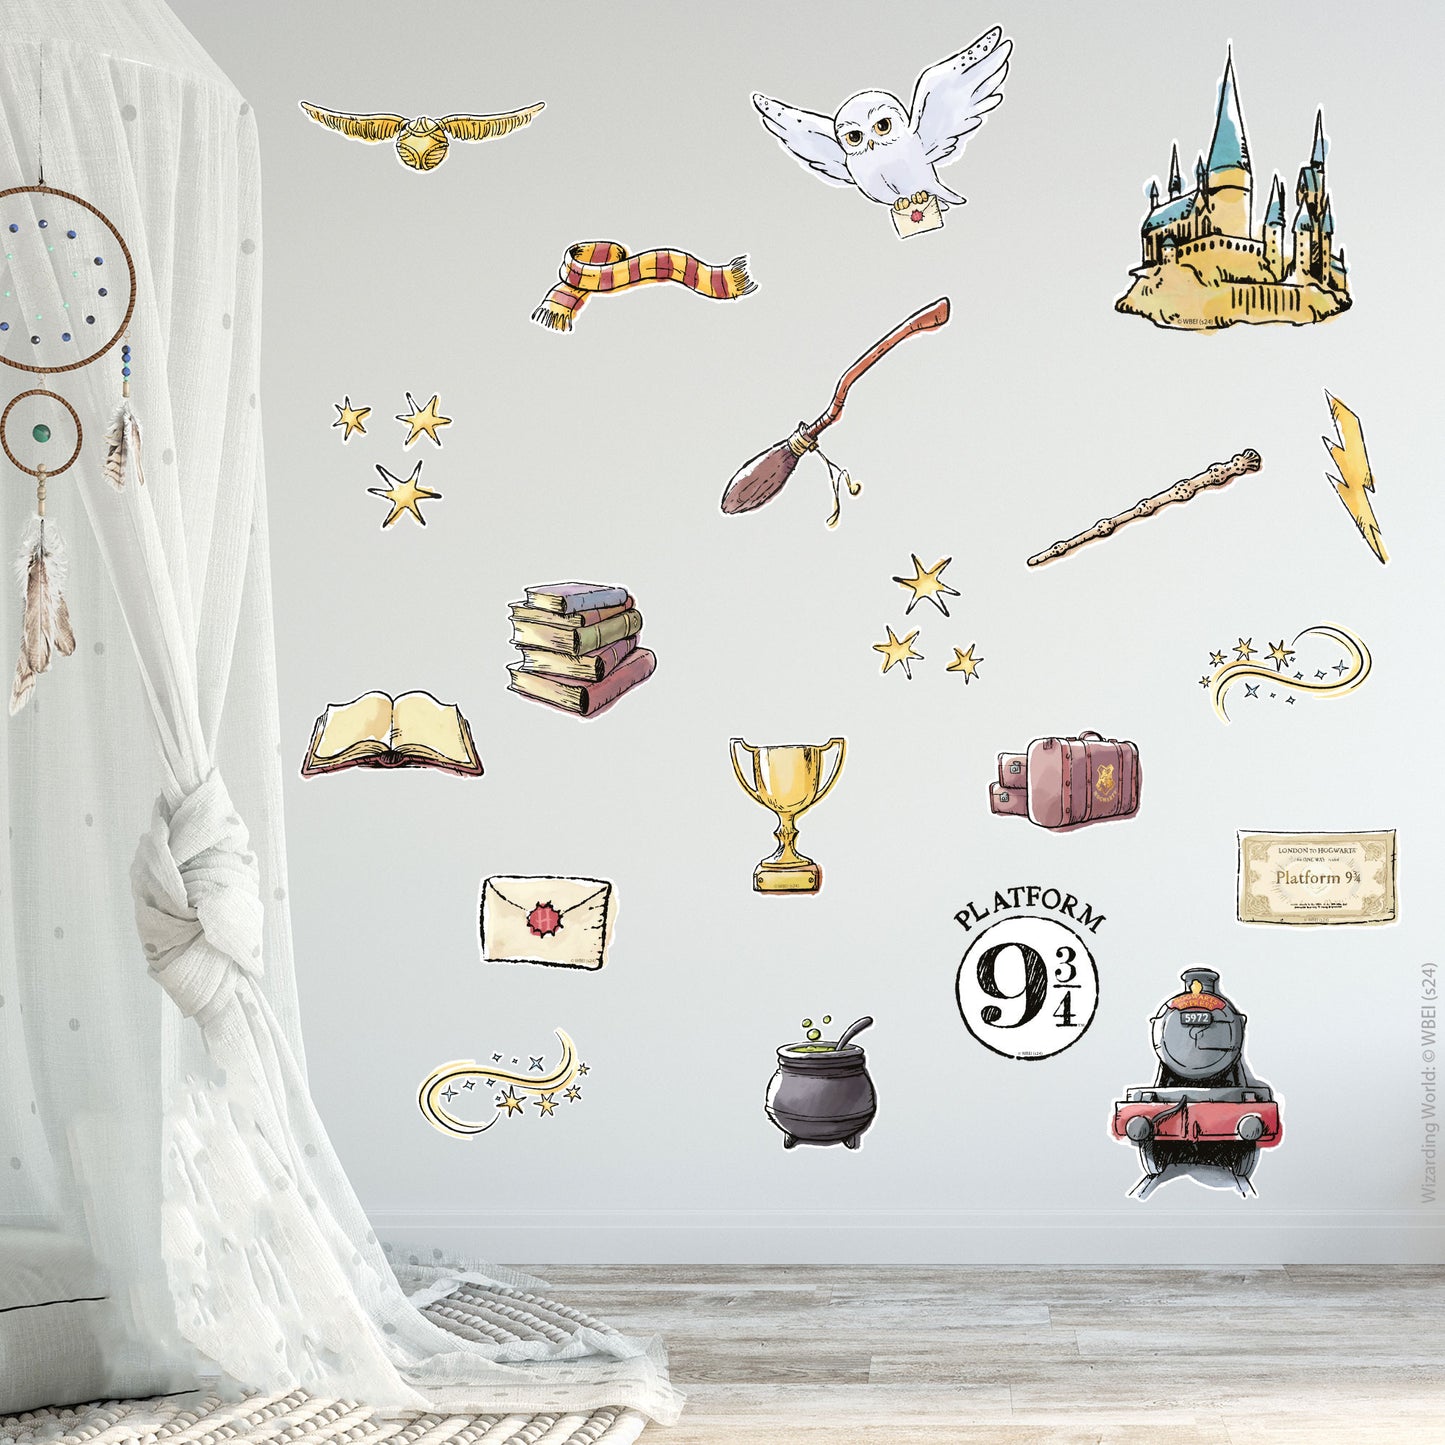 HARRY POTTER Wall Sticker – Watercolour Icons Set Wall Decal Wizarding World Art